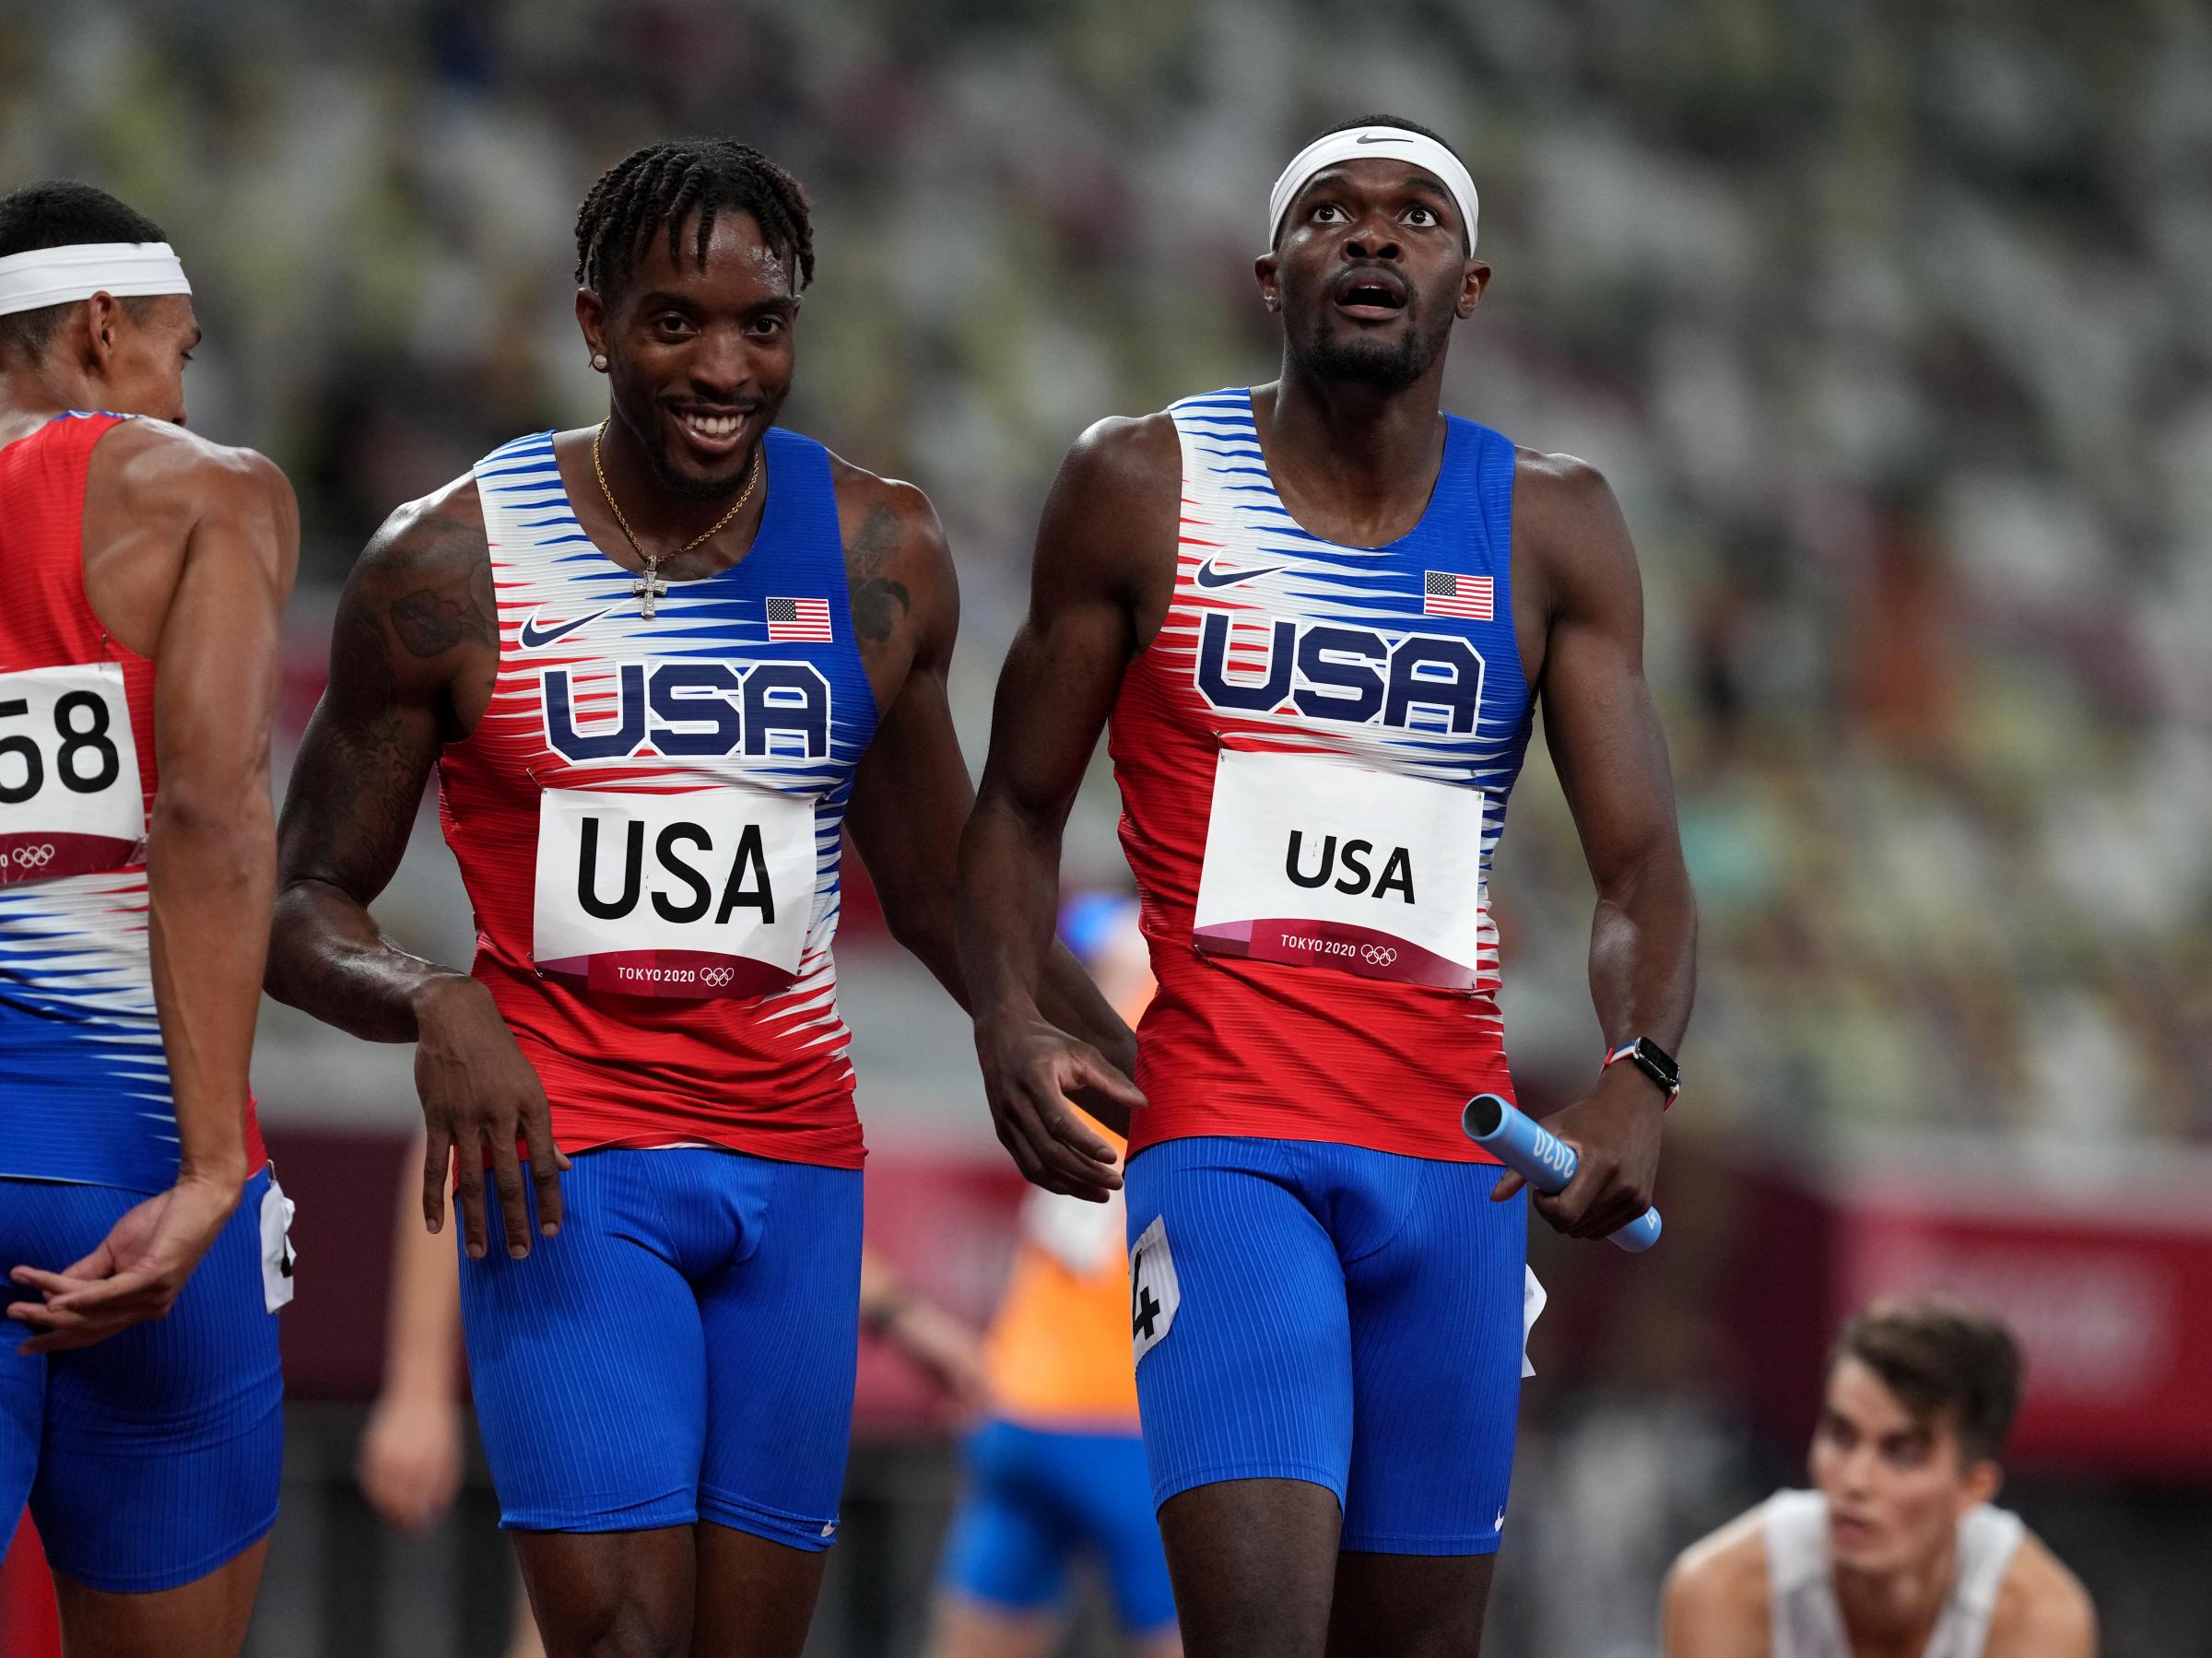 U.S. Men Win 4x400 Meter Relay And Get The Team's First Track Gold In